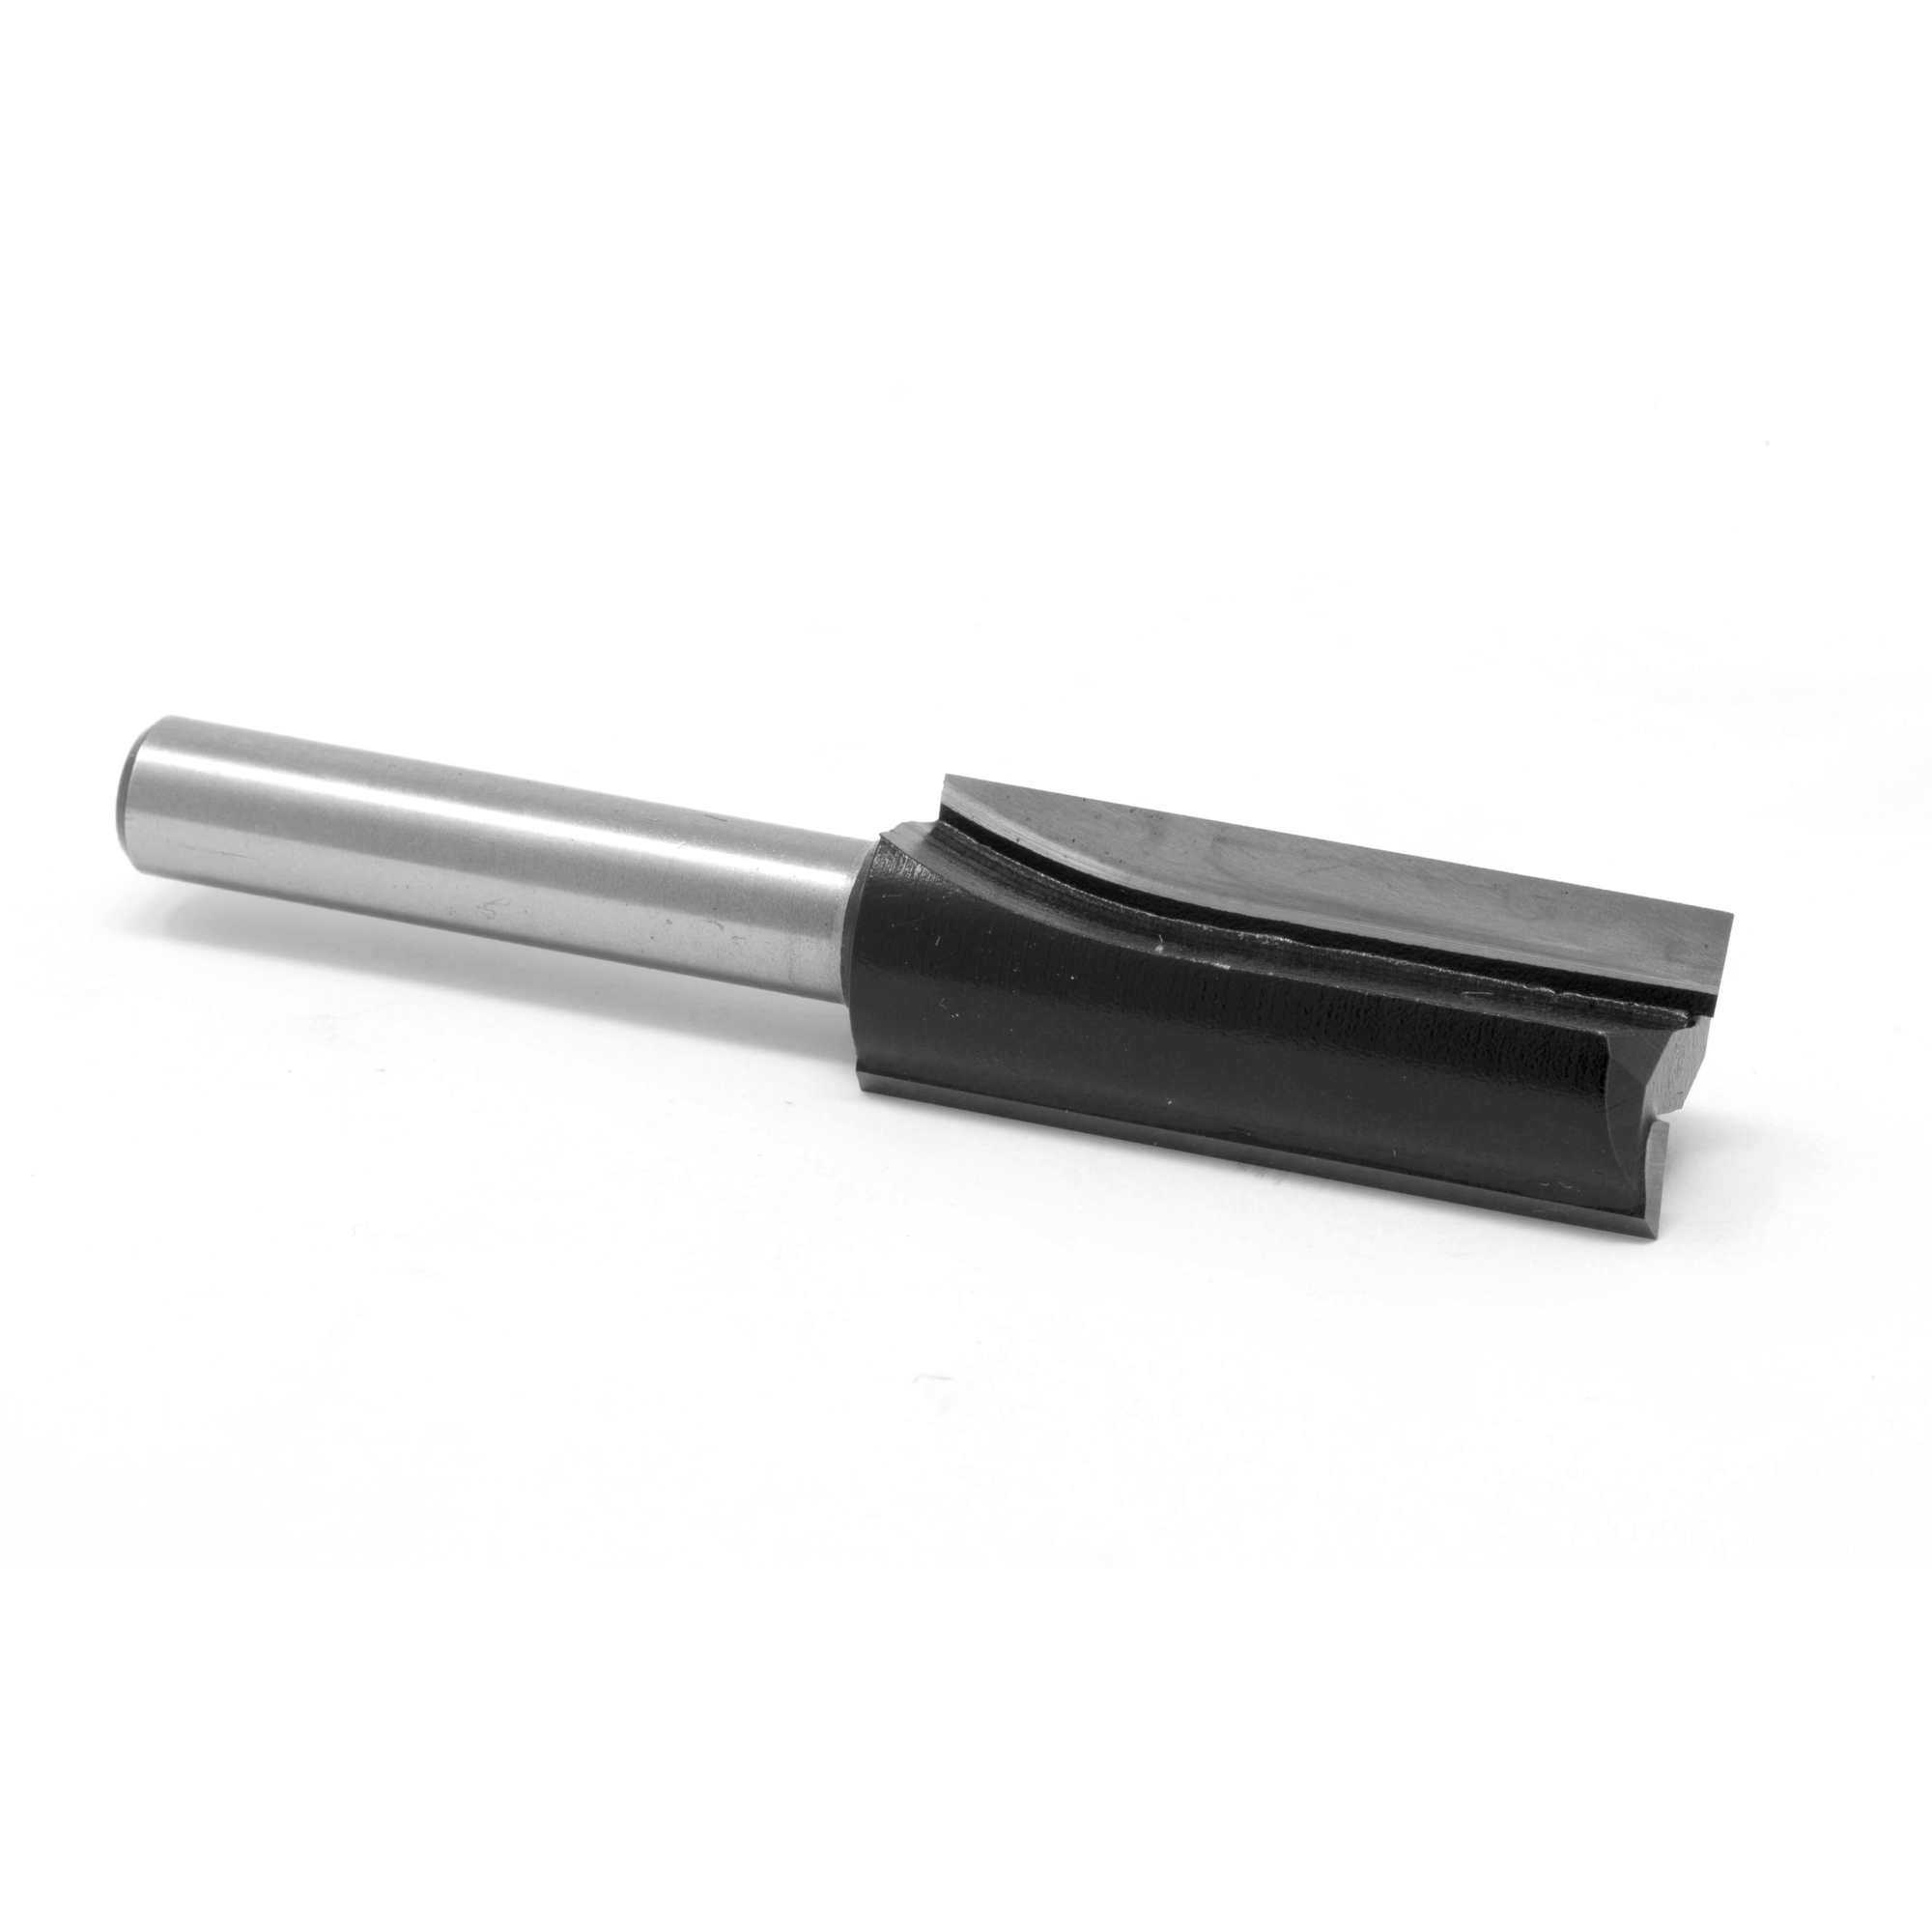 WEN, 1/2Inch Straight 2-Flute Carbide-Tipped Router Bit, Shank Size 1/4 in, Bit Diameter 1/2 in, Model RB108FF